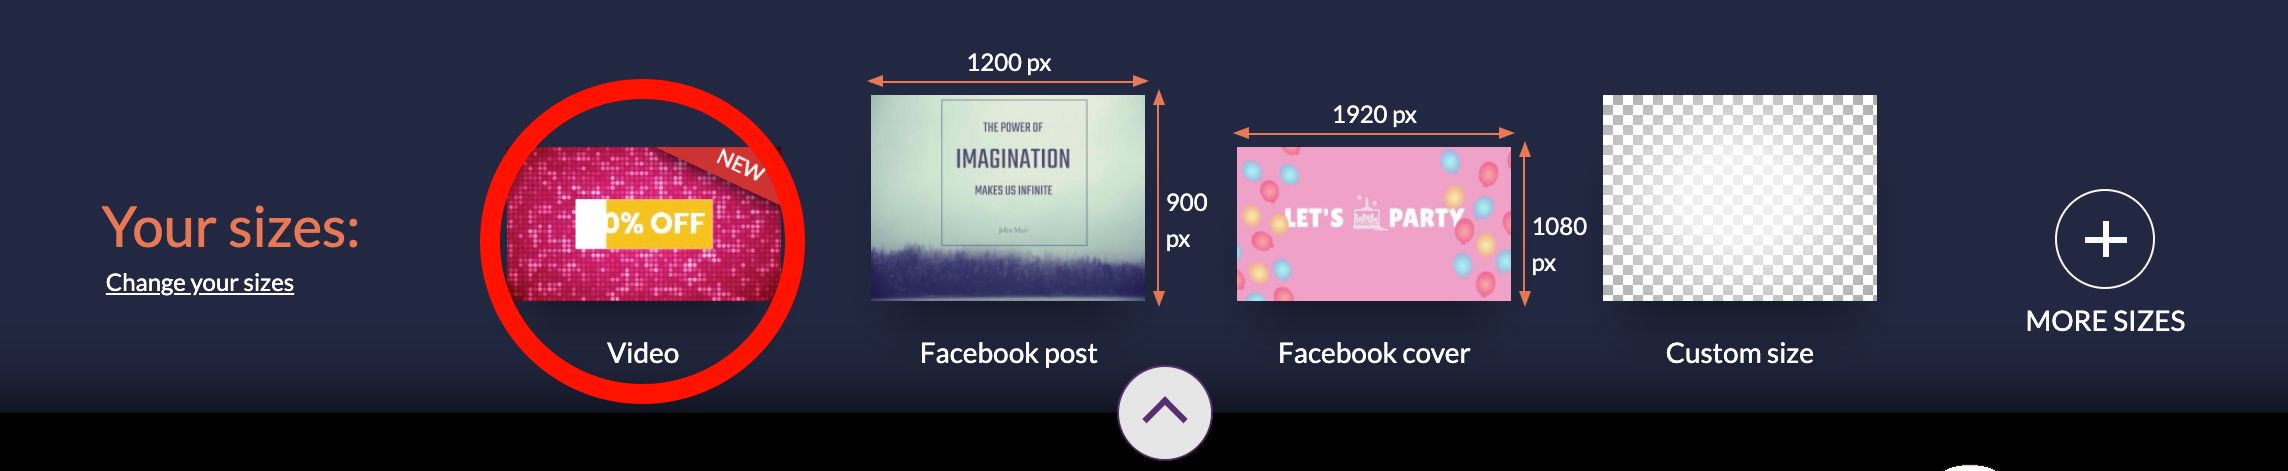 Step 2 Select a Blank Canvas - Step-by-step guide on how to create outstanding Facebook video ads using Design Wizard - Image